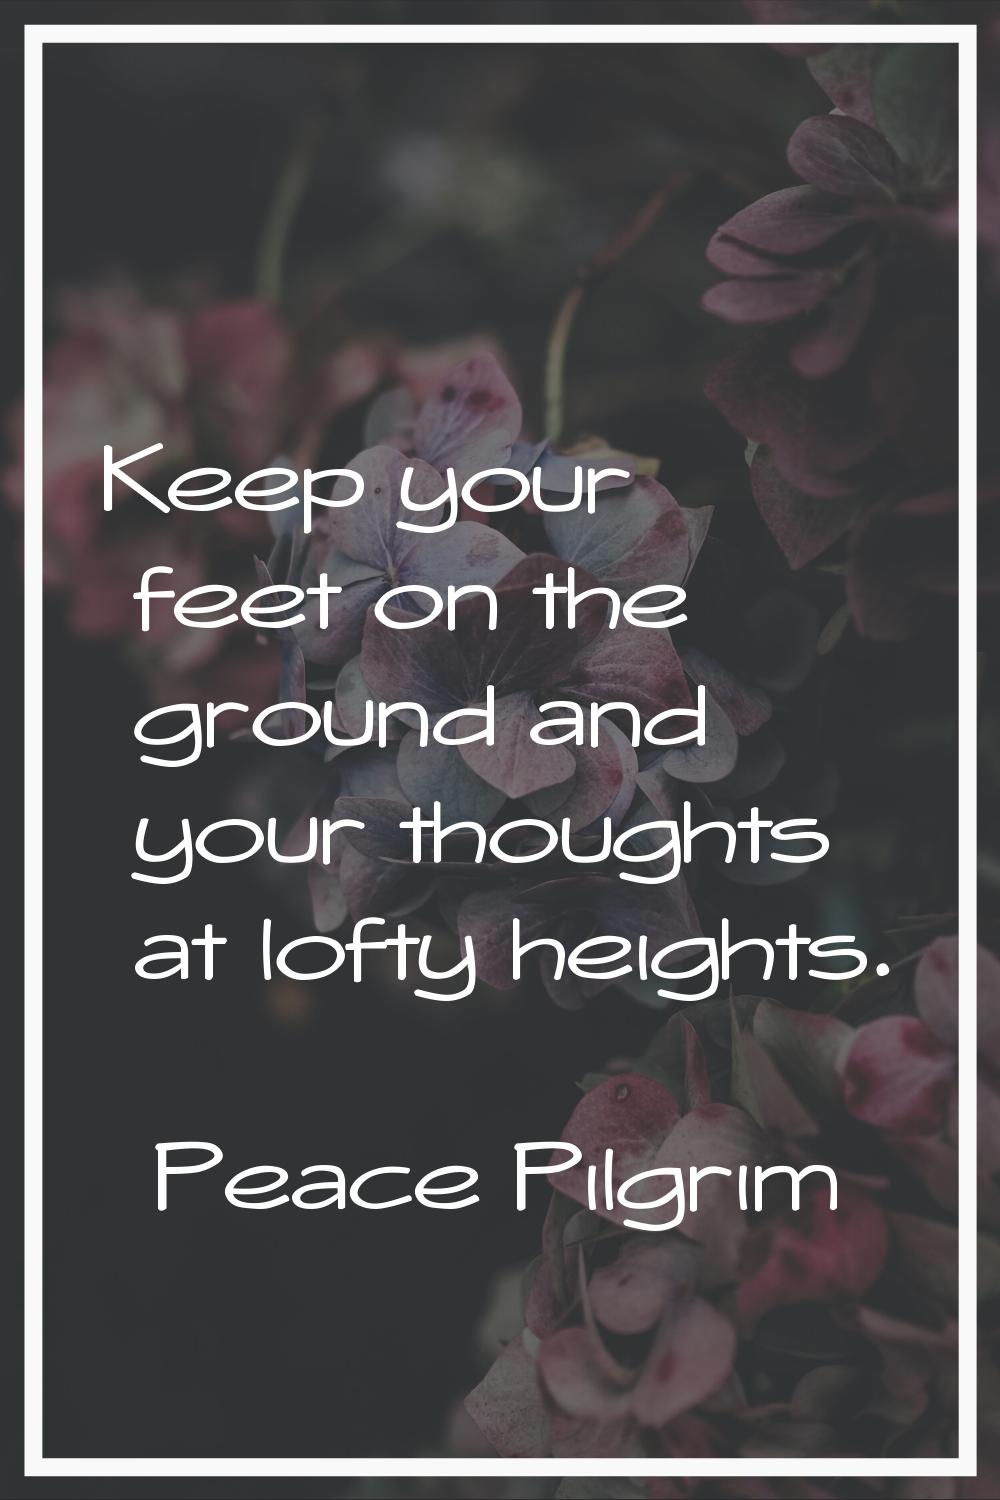 Keep your feet on the ground and your thoughts at lofty heights.